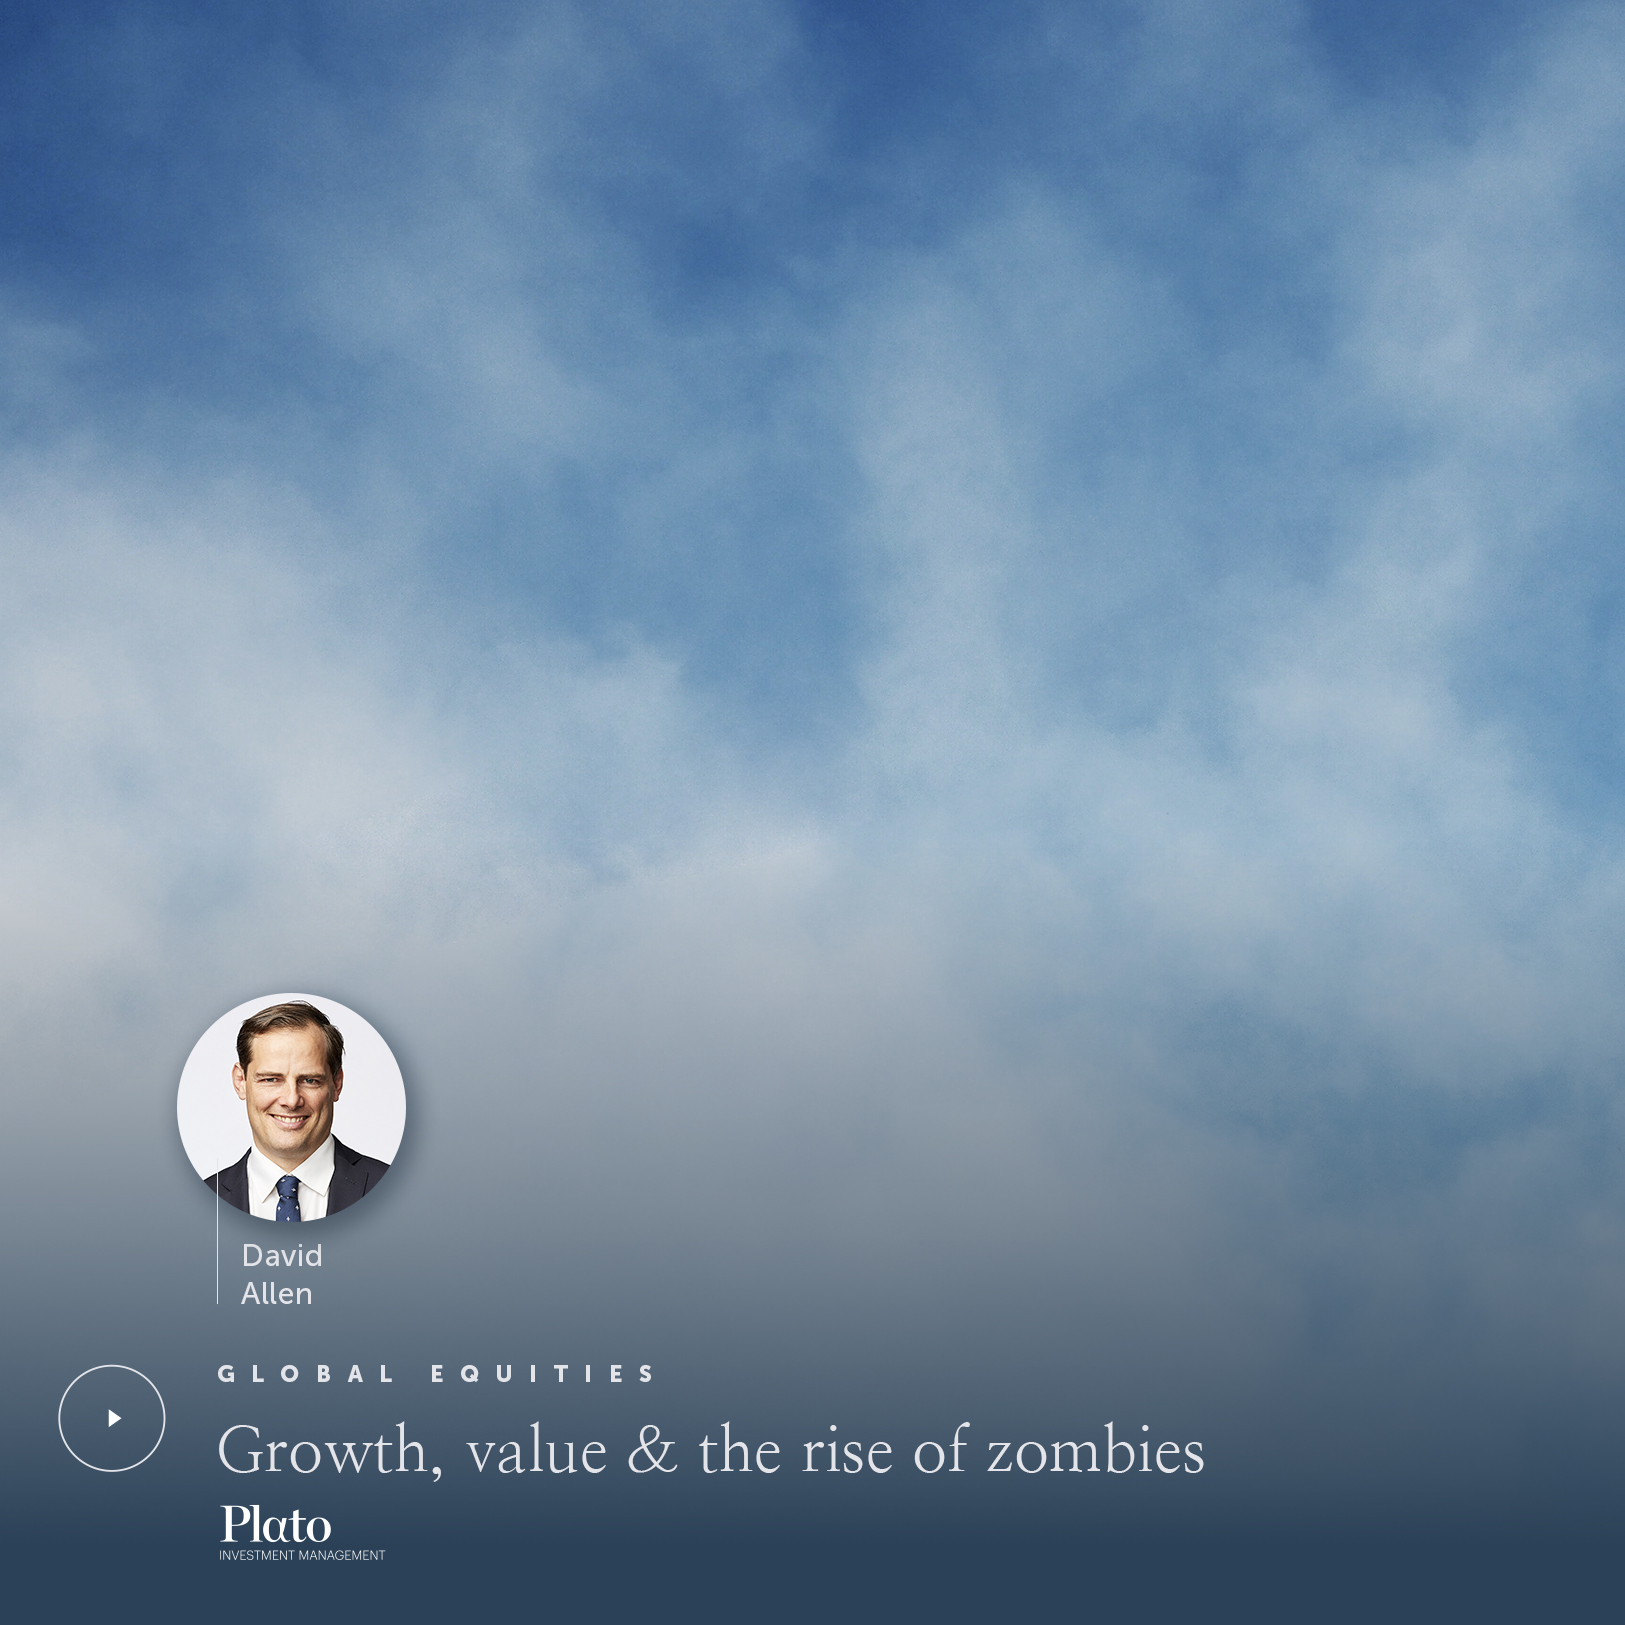 Growth, value & the rise of zombies